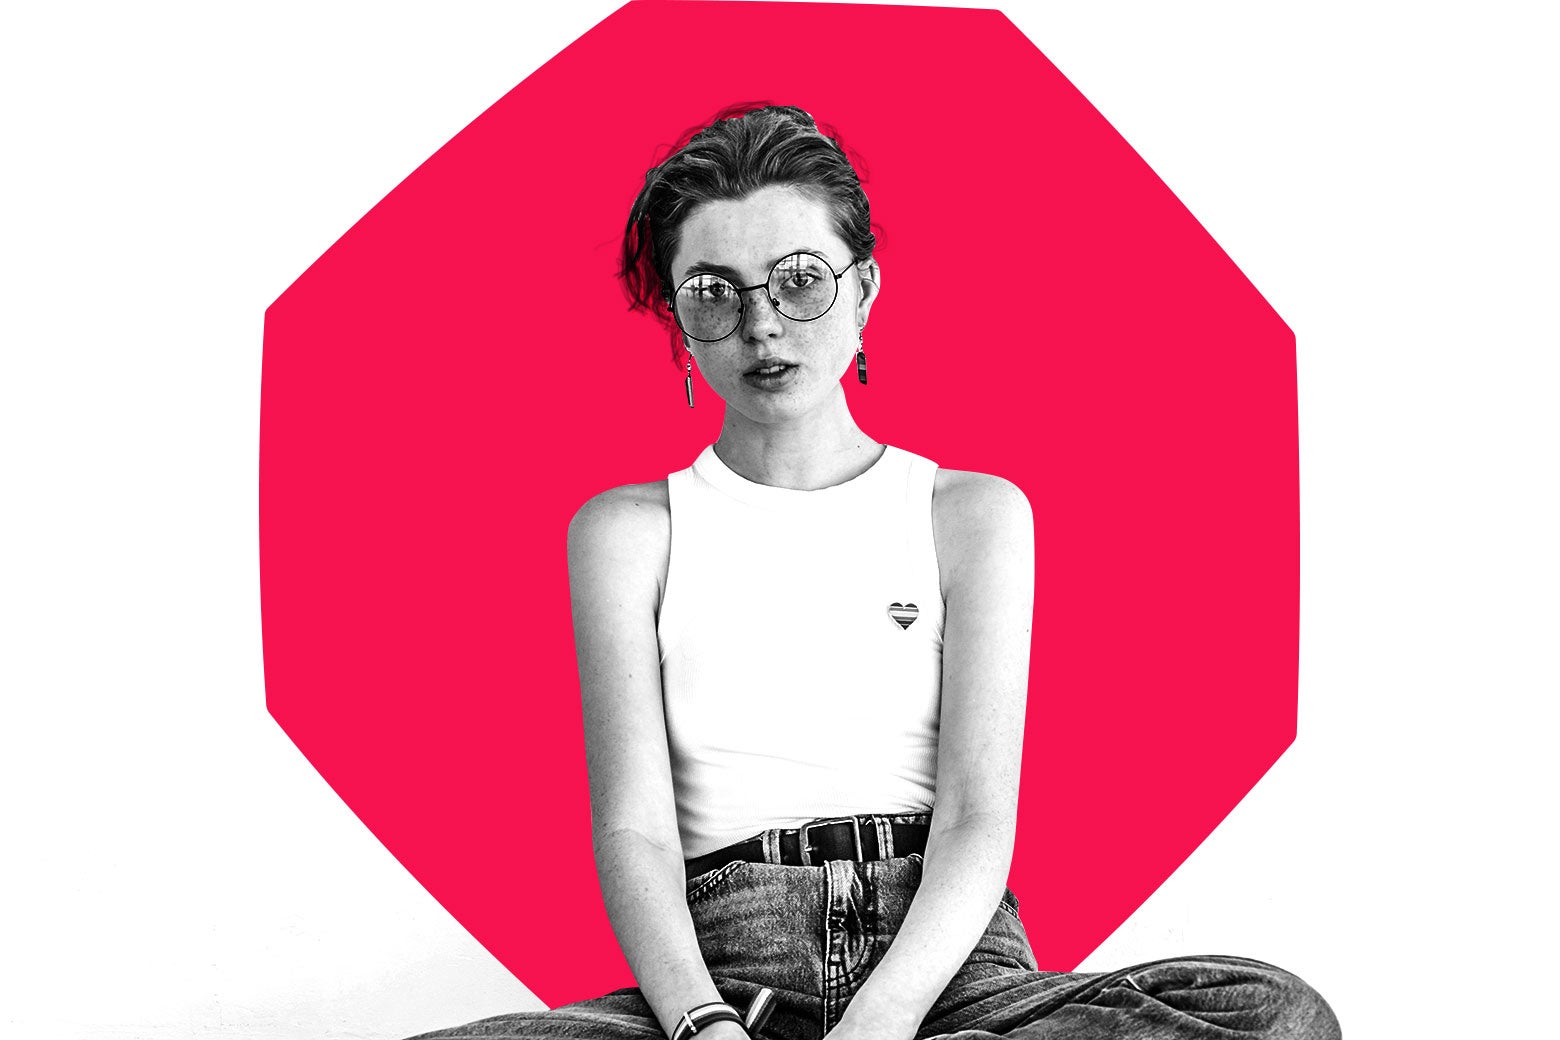 Girl with a short haircut and white tee sitting cross-legged. There's a stop sign overlaid behind her.